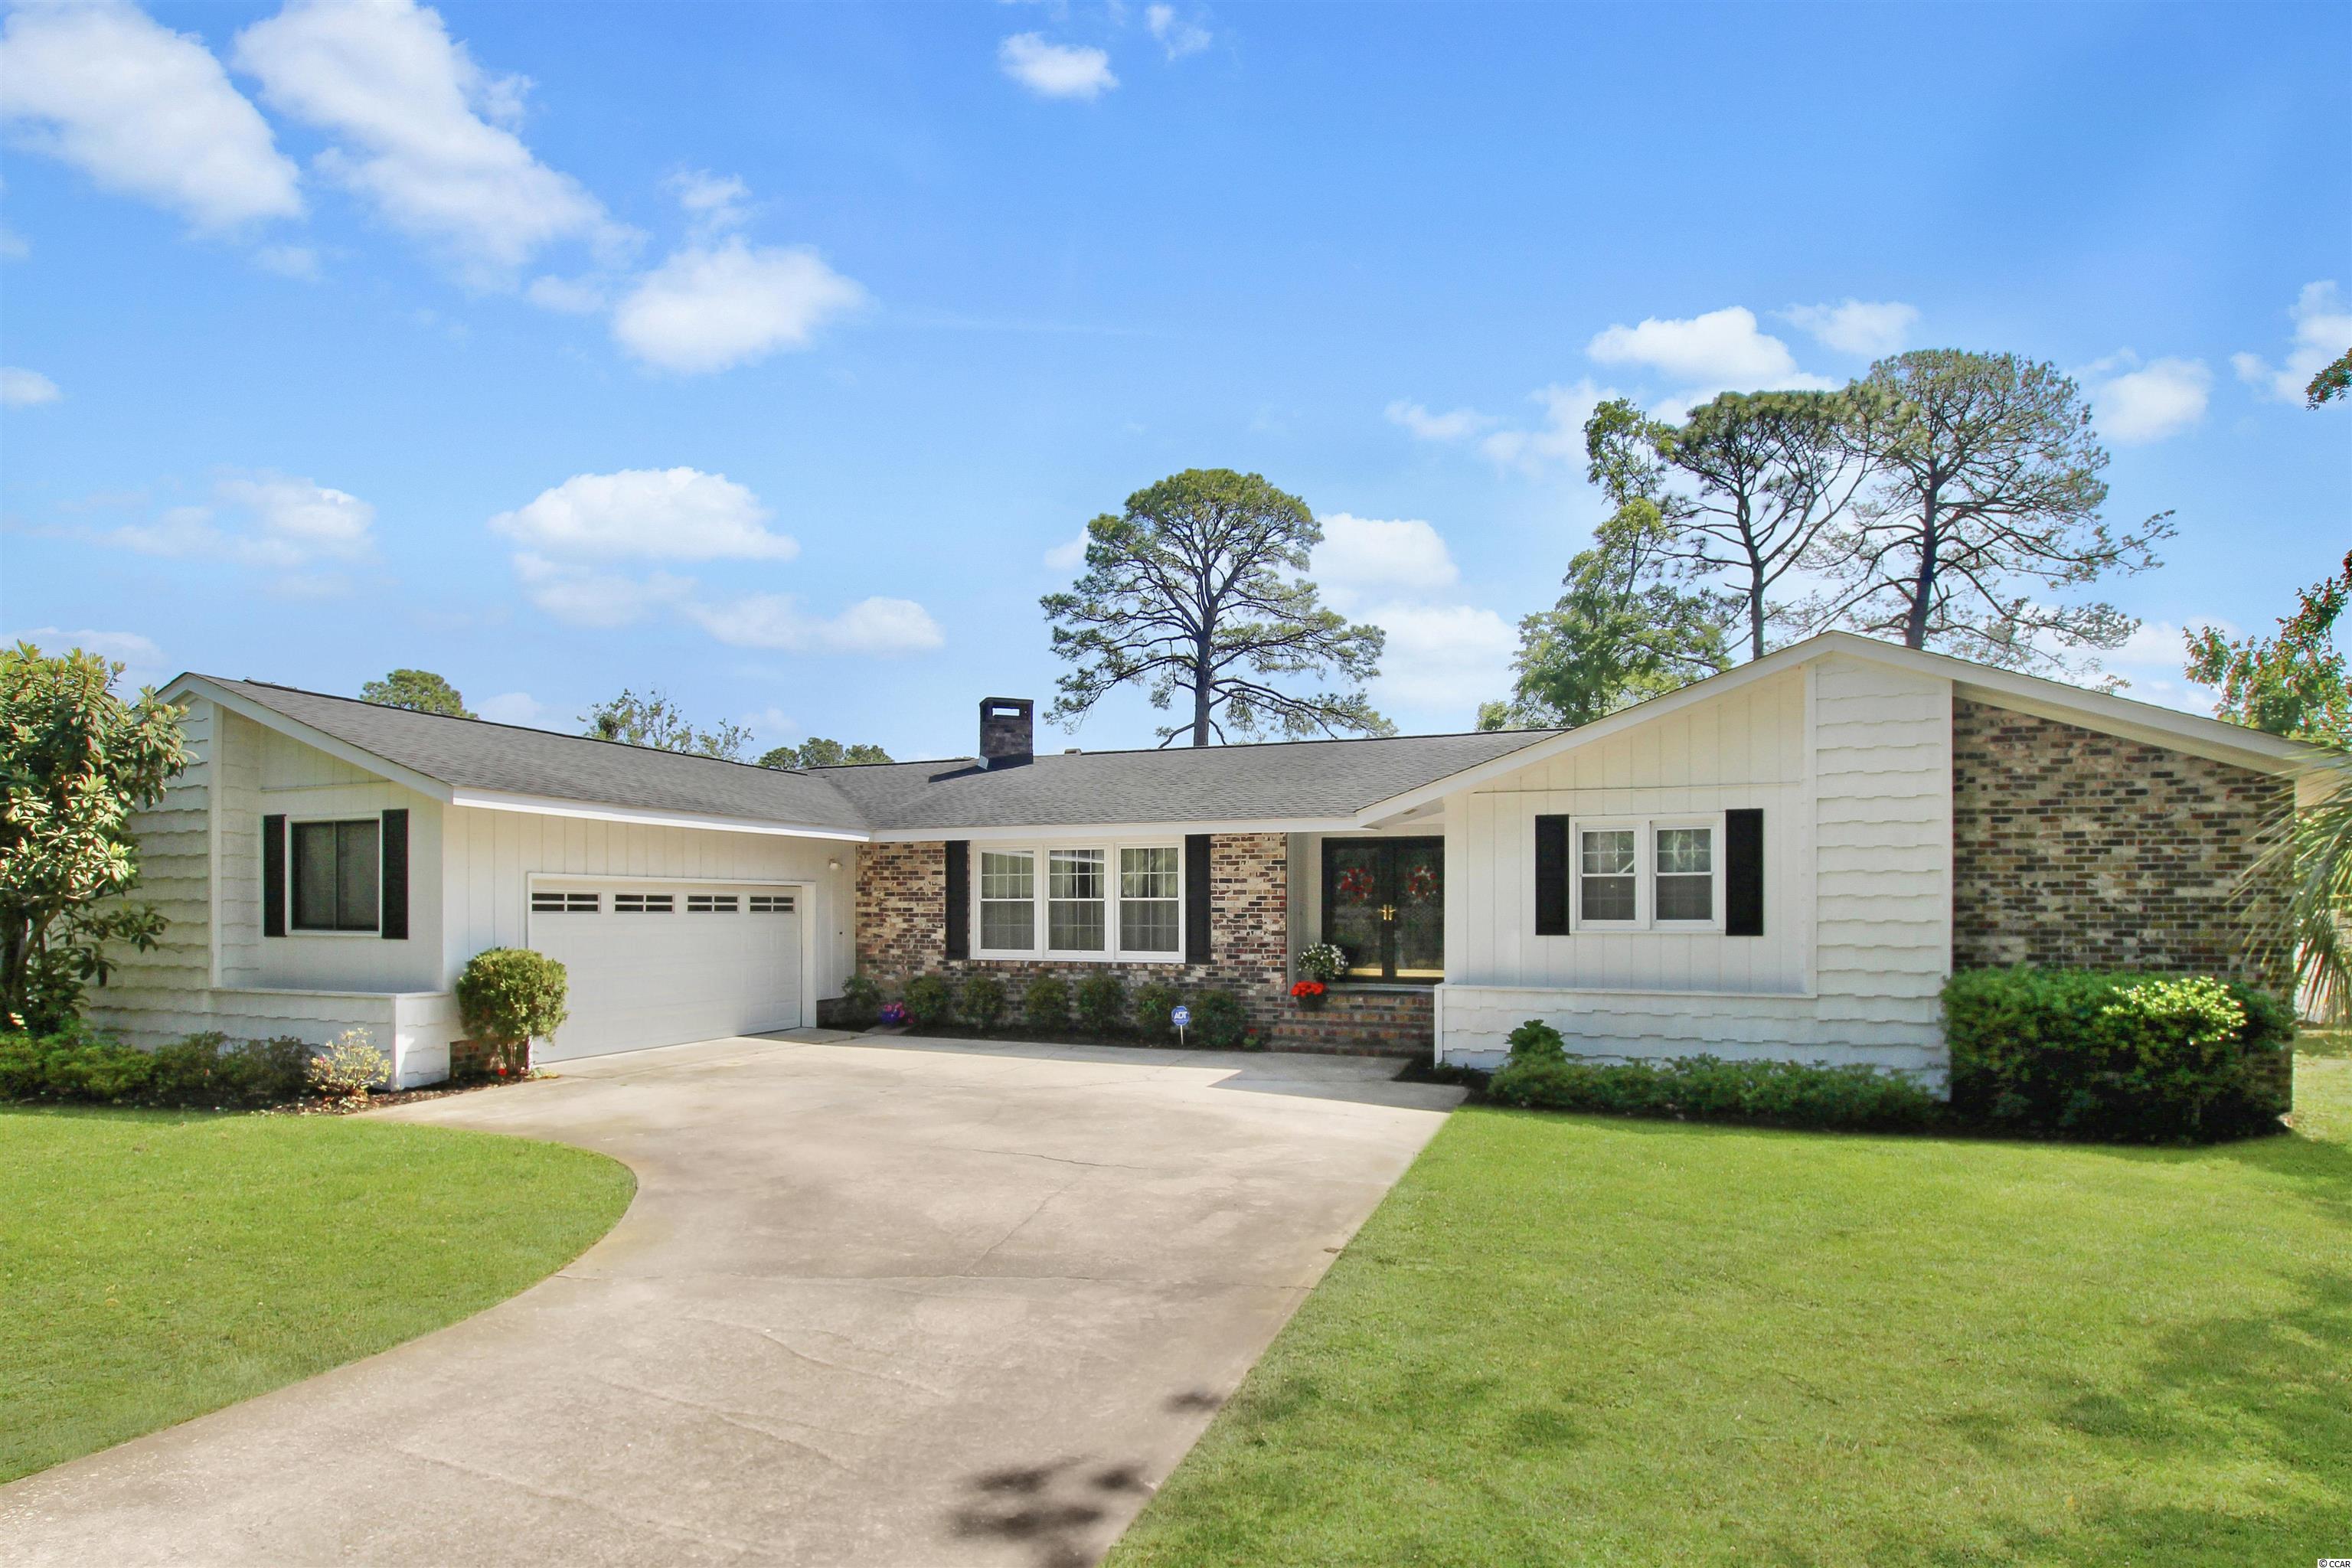 1461 Crooked Pine Dr. Surfside Beach, SC 29575